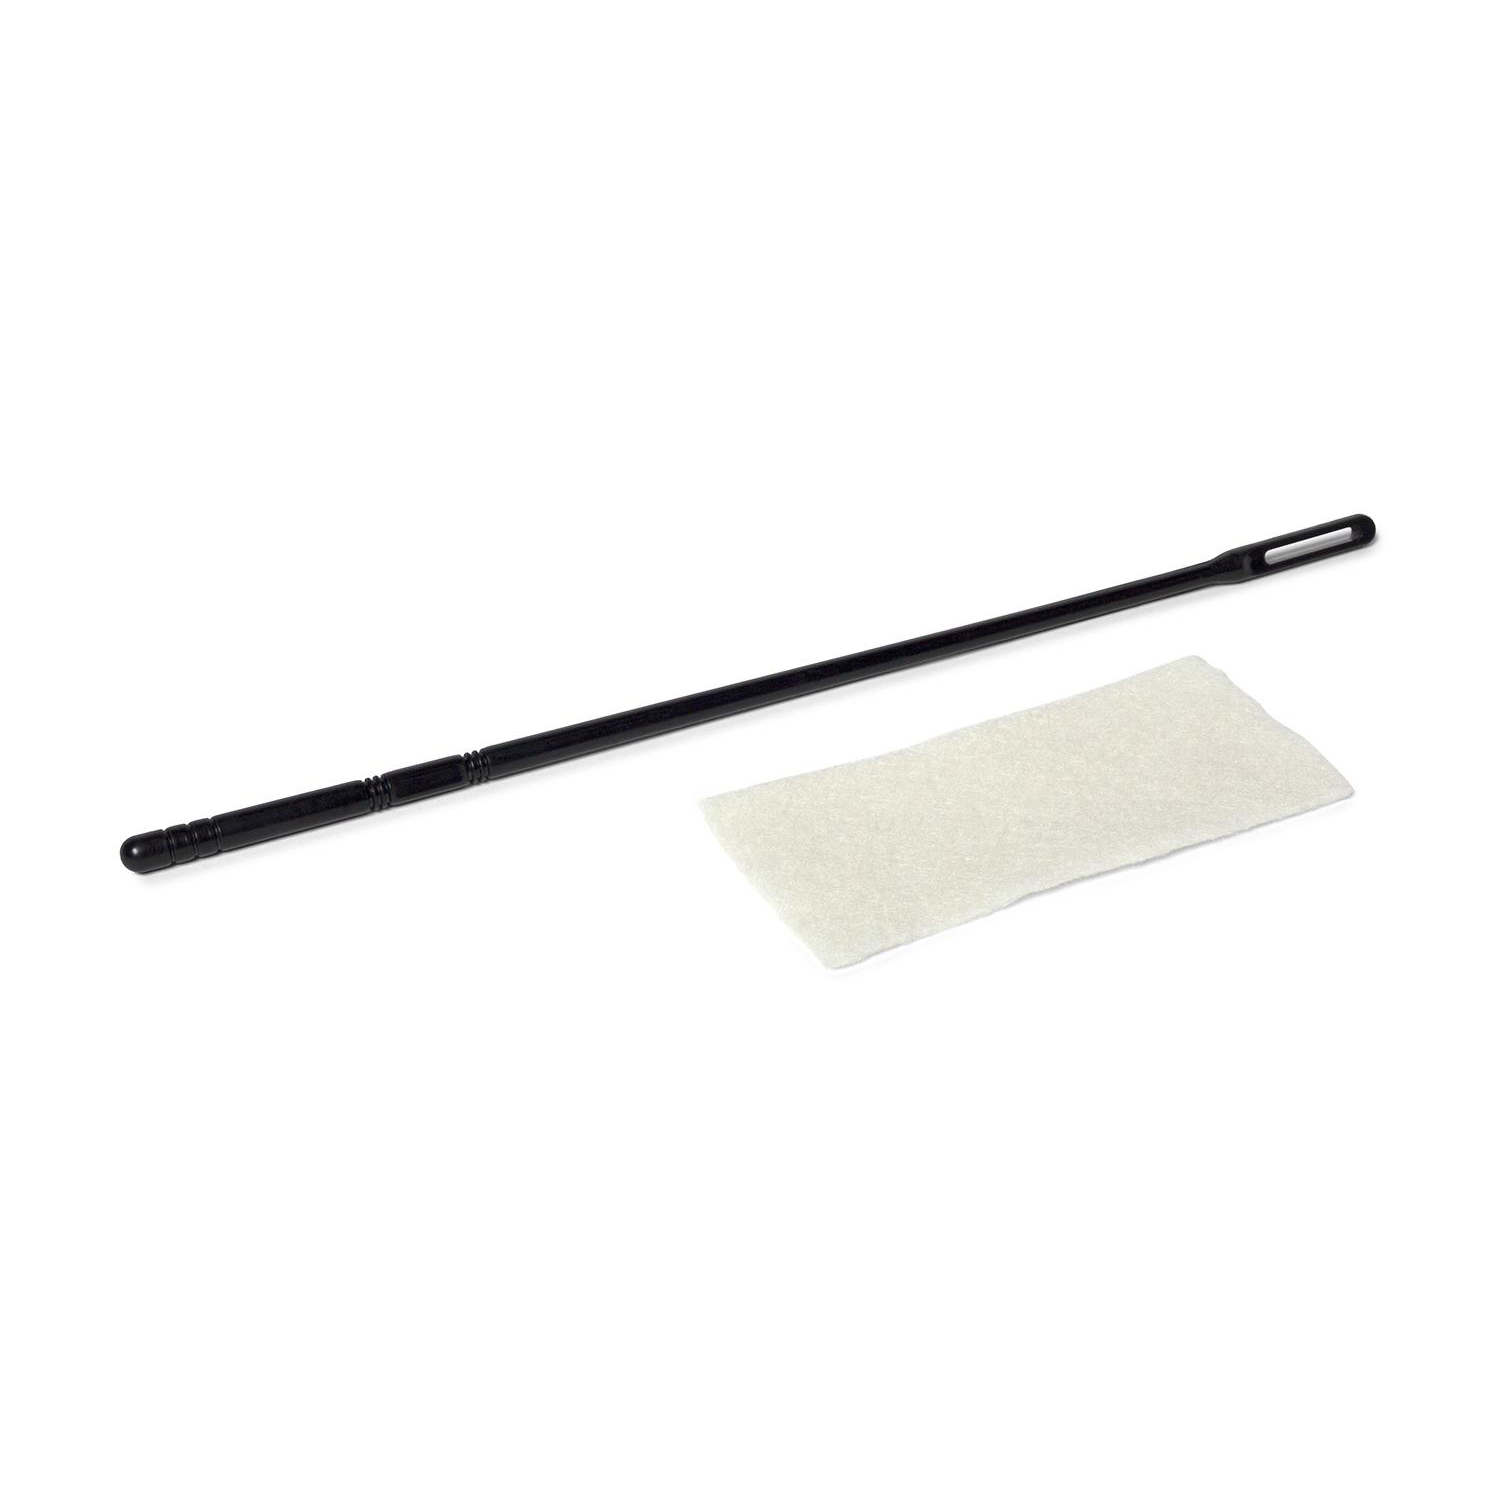 Plastic Cleaning Rod, Cleaning Rods Flutes, Flute Cleaning Cloth